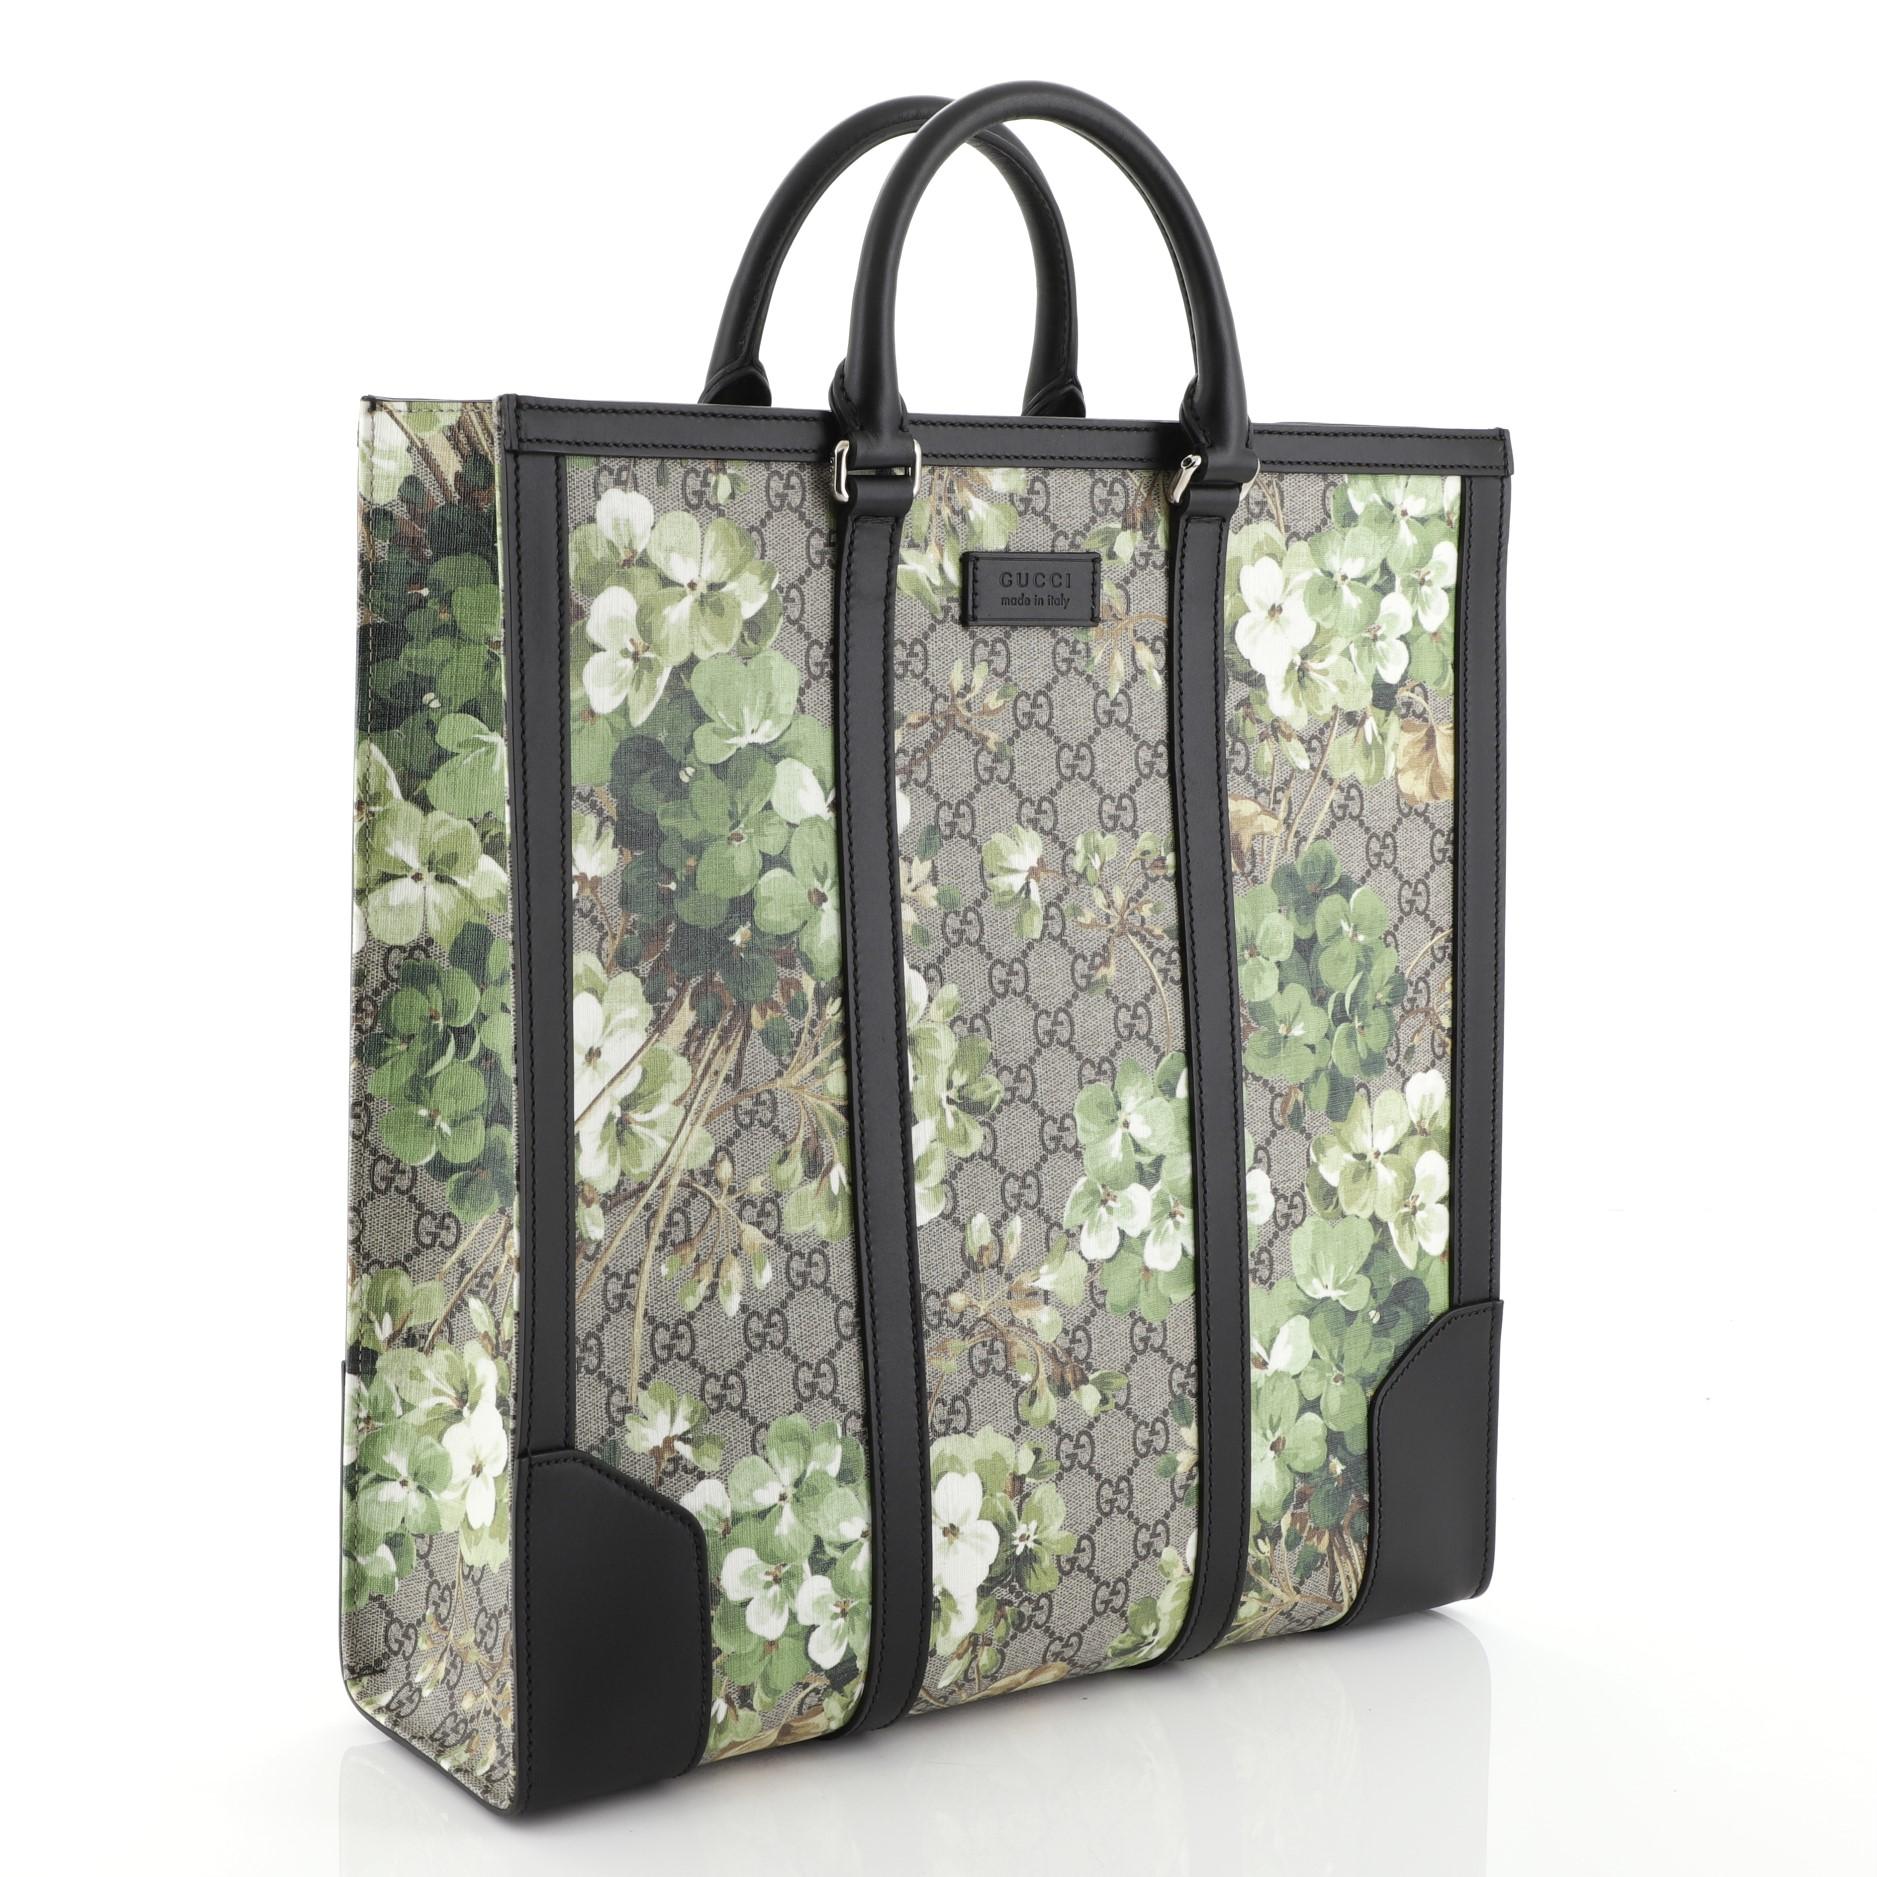 This Gucci Convertible Tote Blooms Print GG Coated Canvas Tall, crafted from brown GG coated canvas with green blooms print overlay, features dual rolled leather handles, leather trim and silver-tone hardware. It opens to a gray microfiber interior.